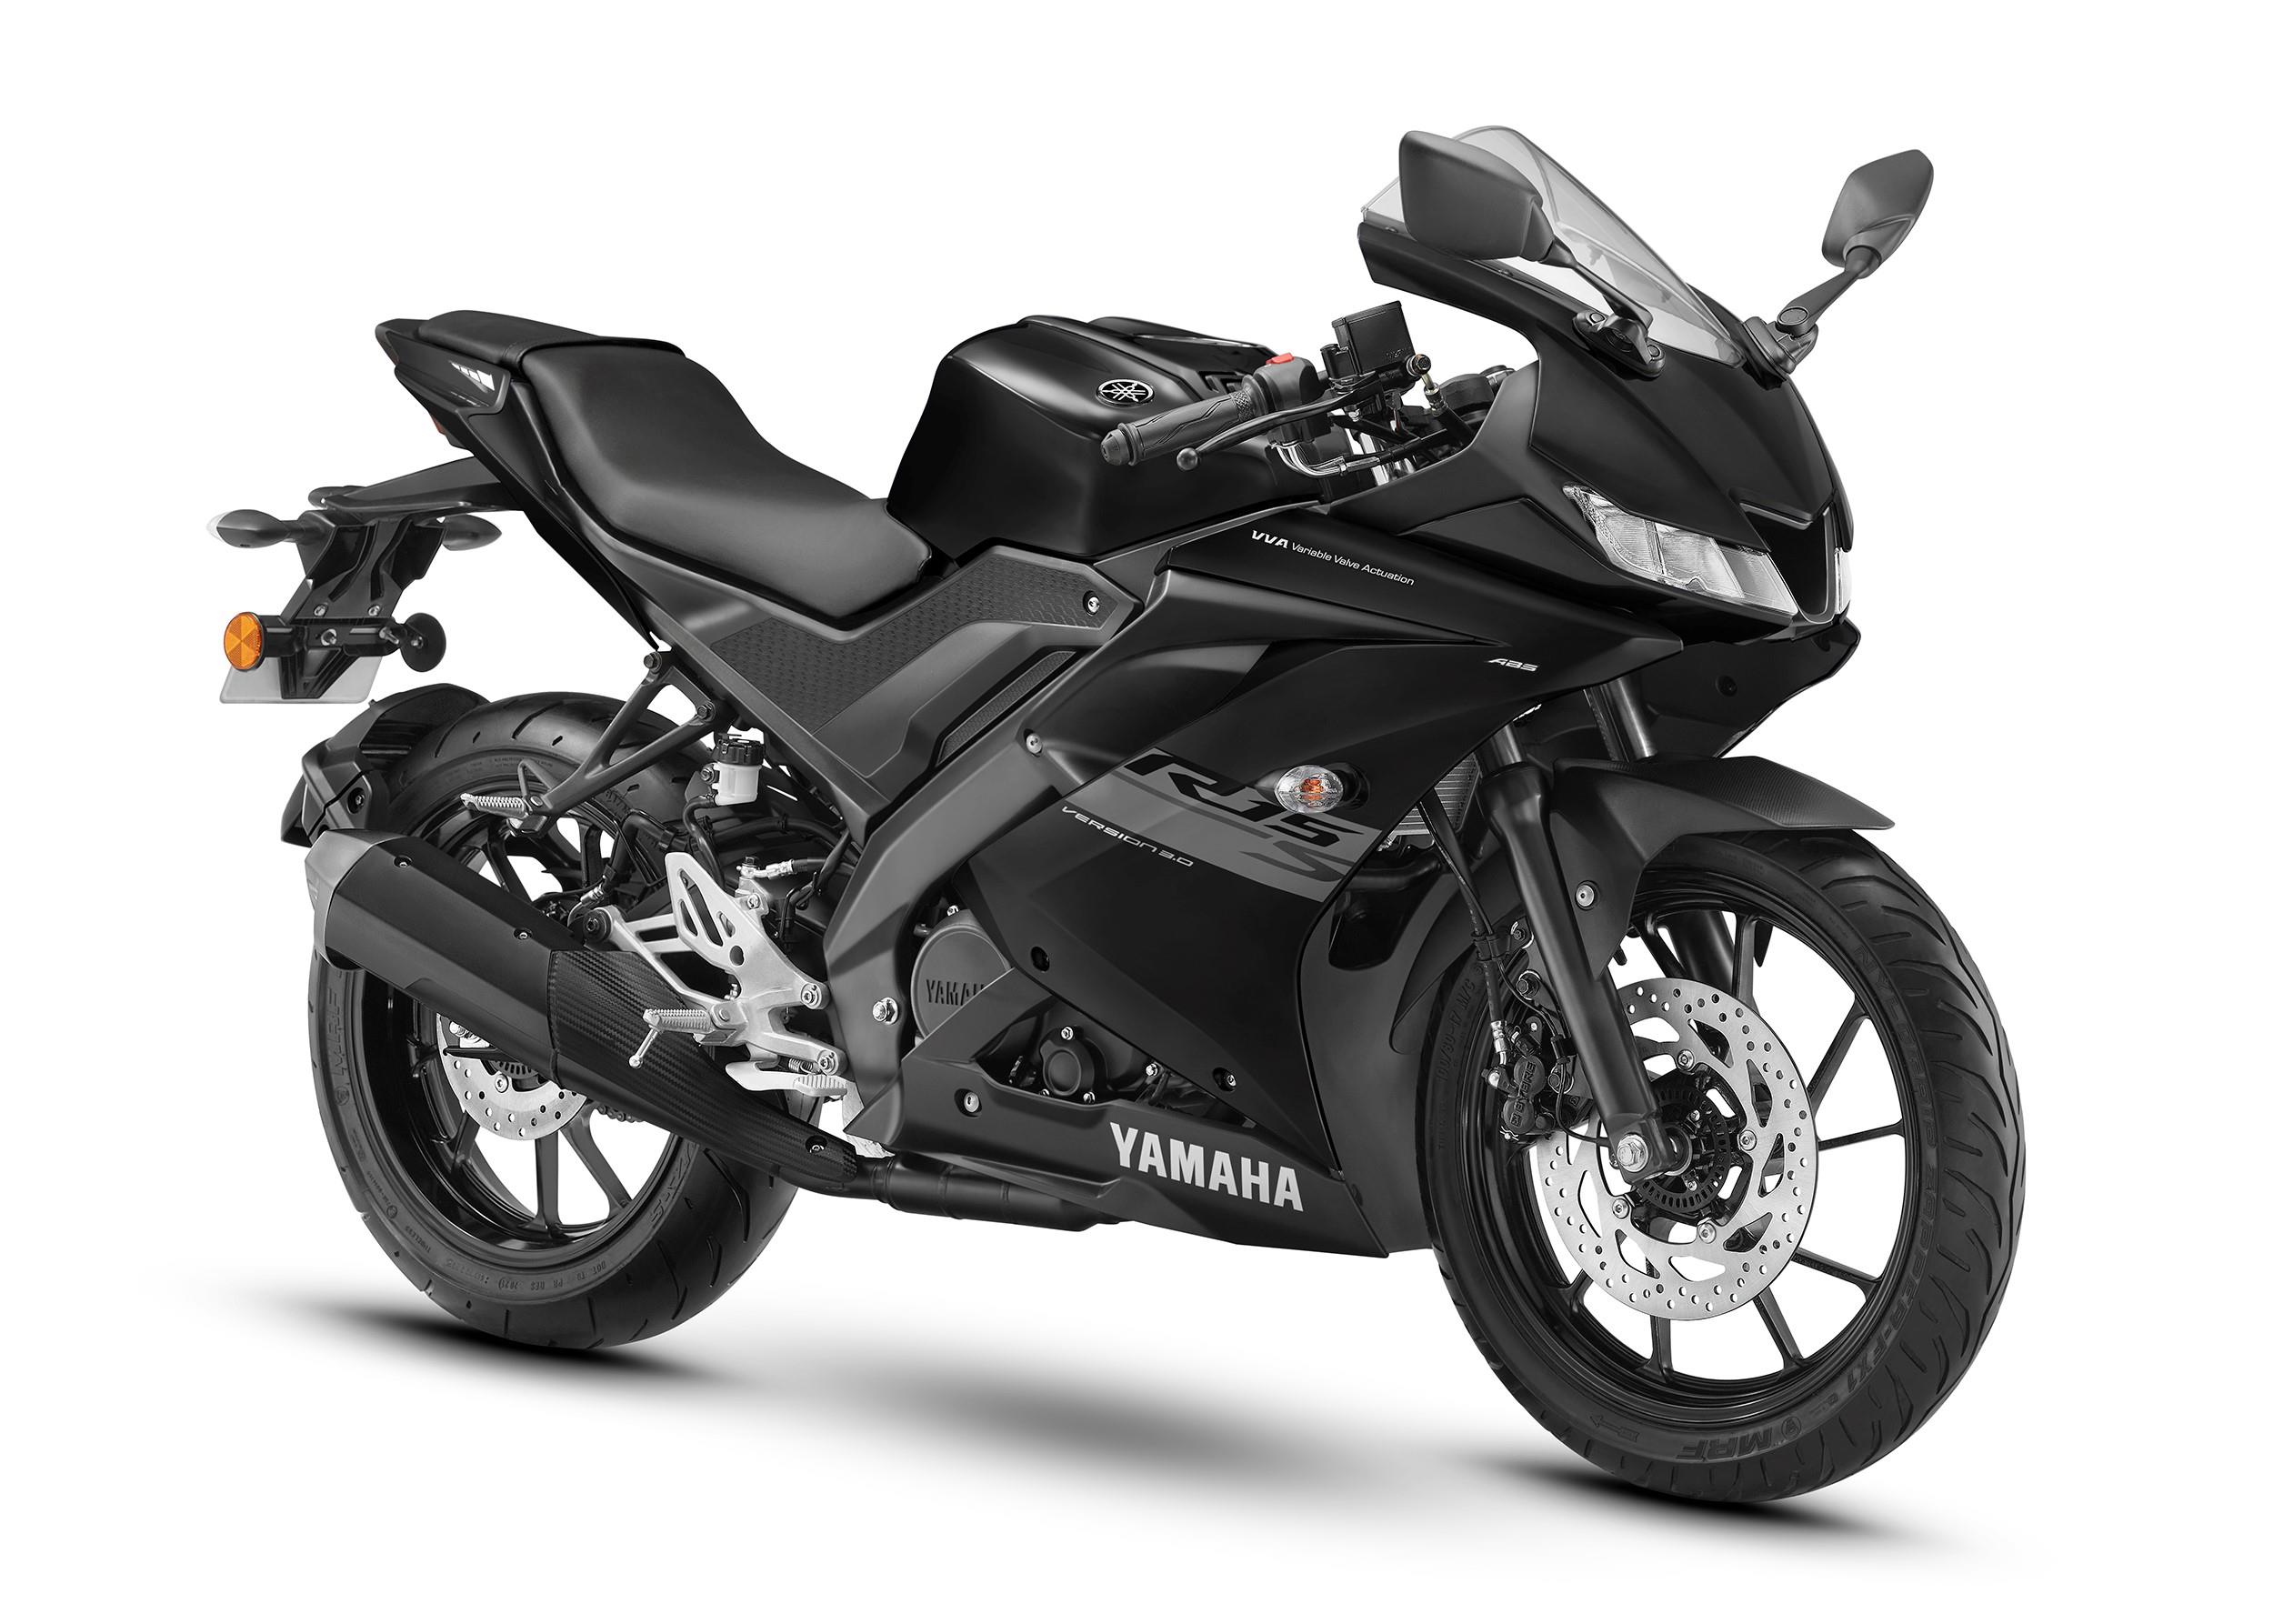 Yamaha R15S Matte Black Edition Price, Specs, Top Speed & Mileage in India